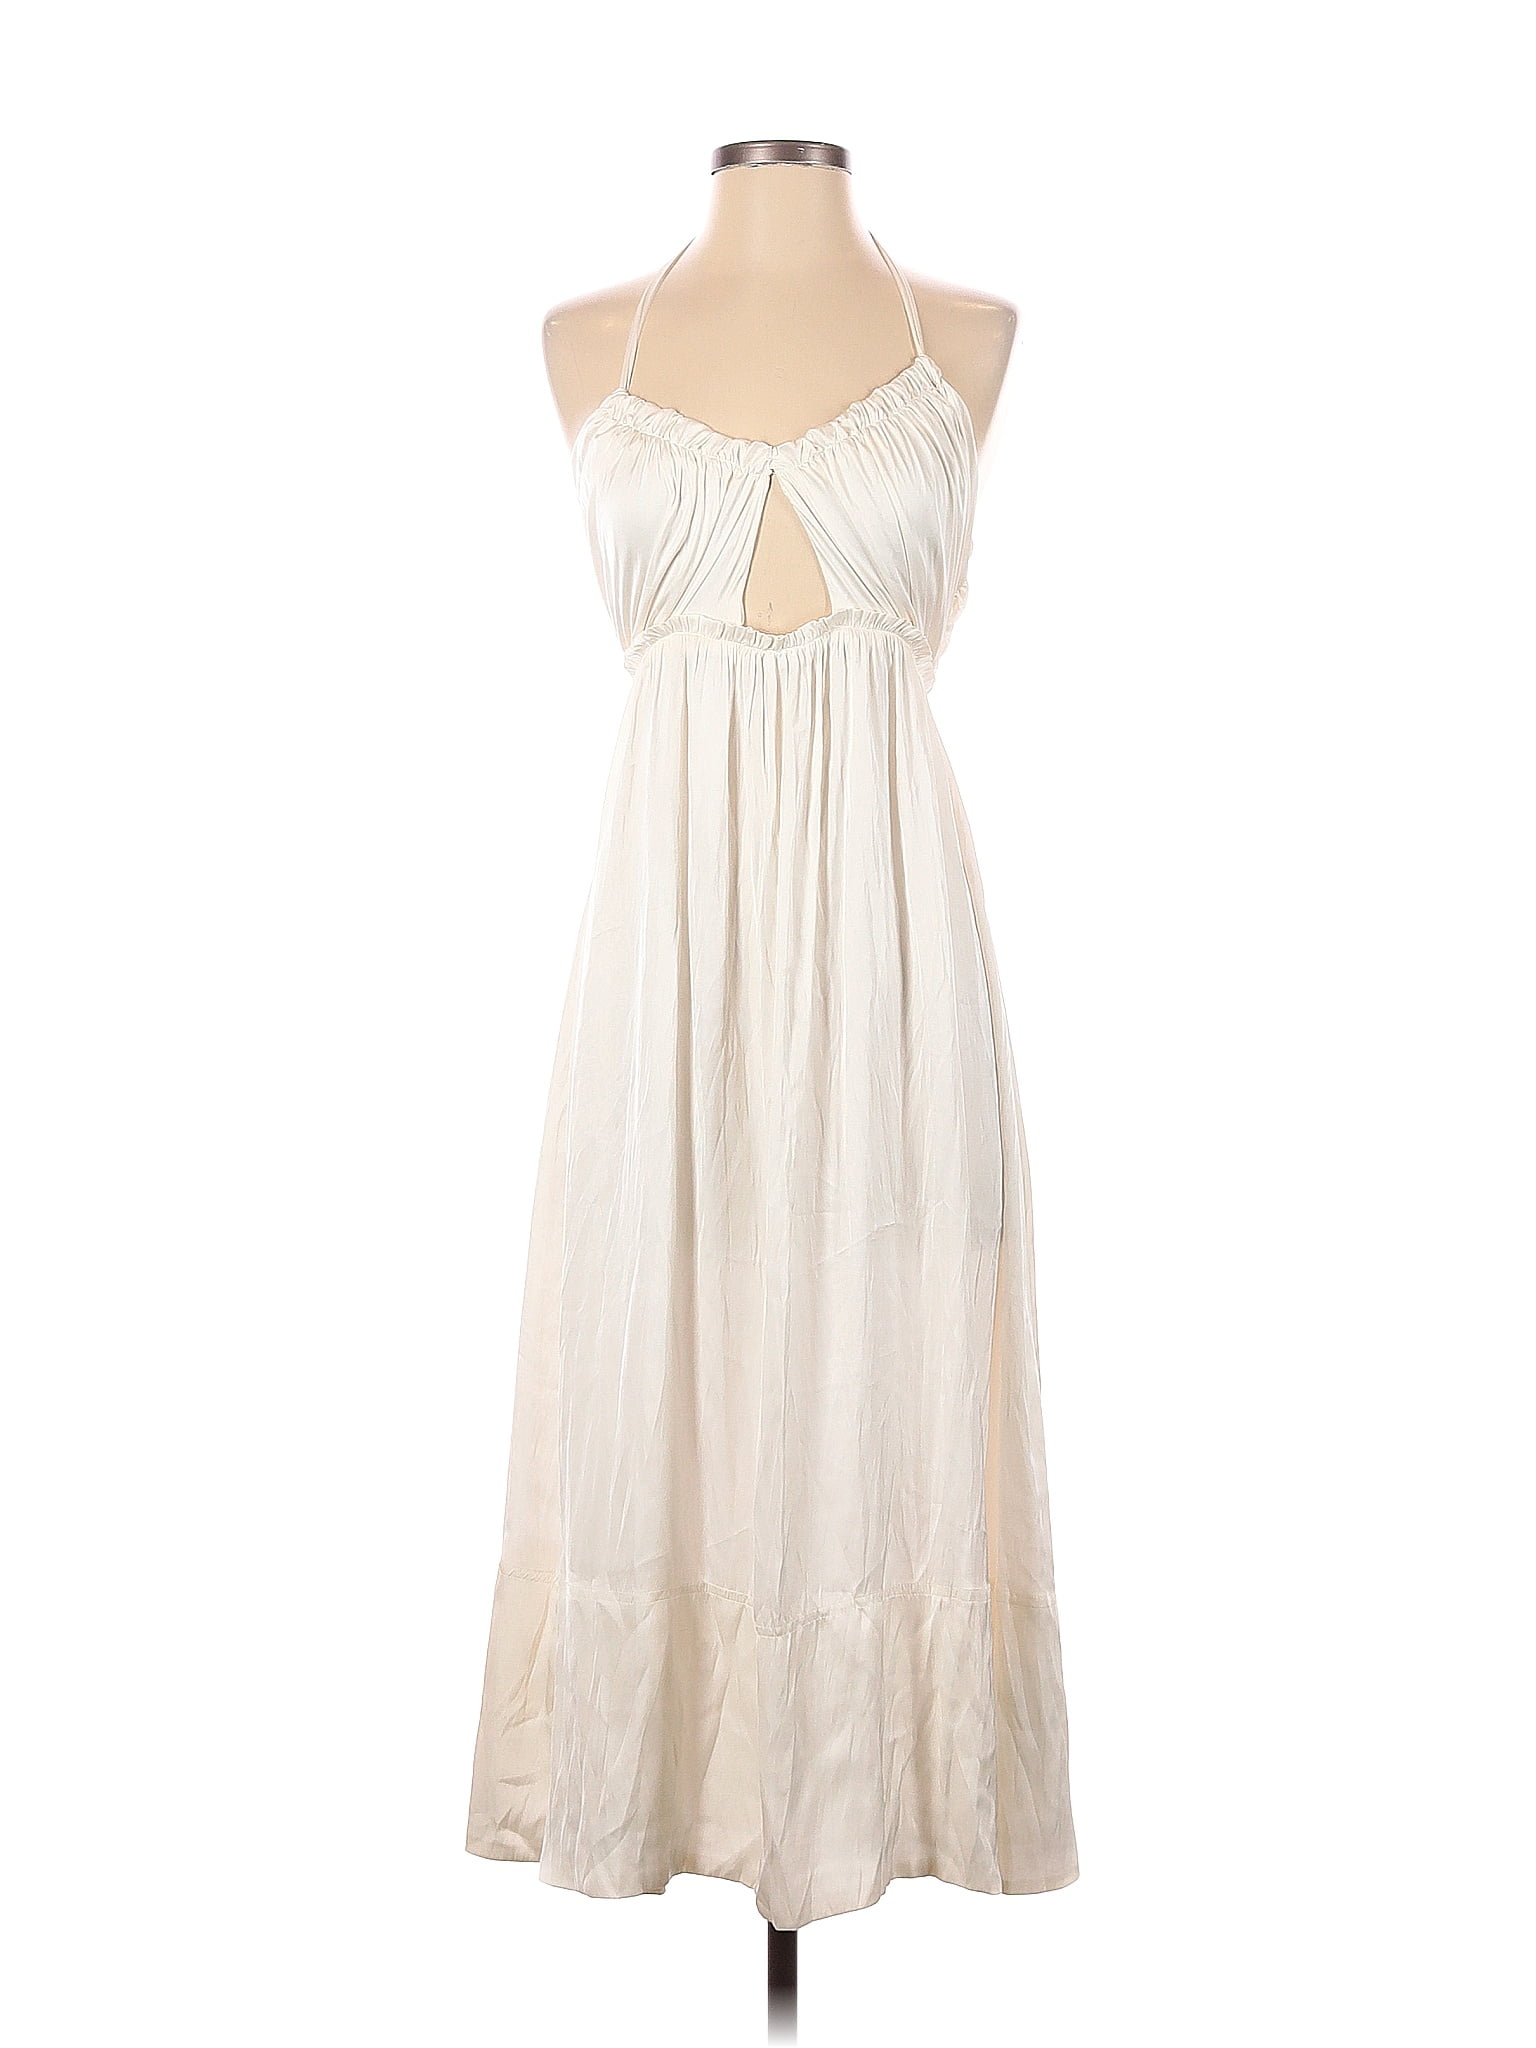 J.Crew Collection 100% Polyester Solid Ivory Casual Dress Size 0 - 77% ...